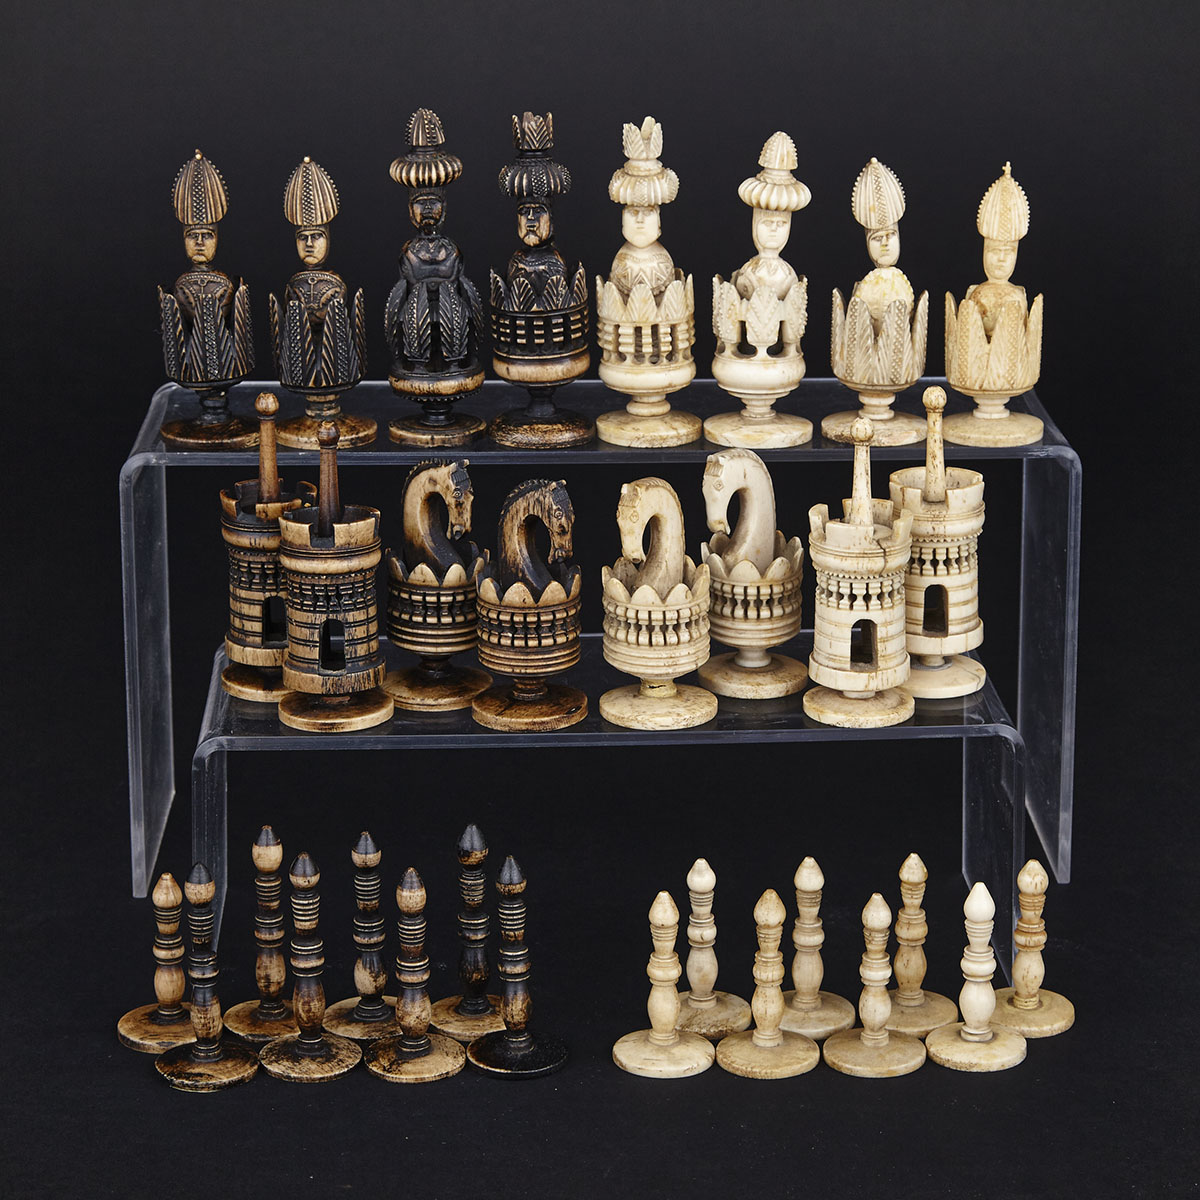 Spanish Turned and Carved Bone Bust Type ‘Pulpit’ Chess Set, c.1800